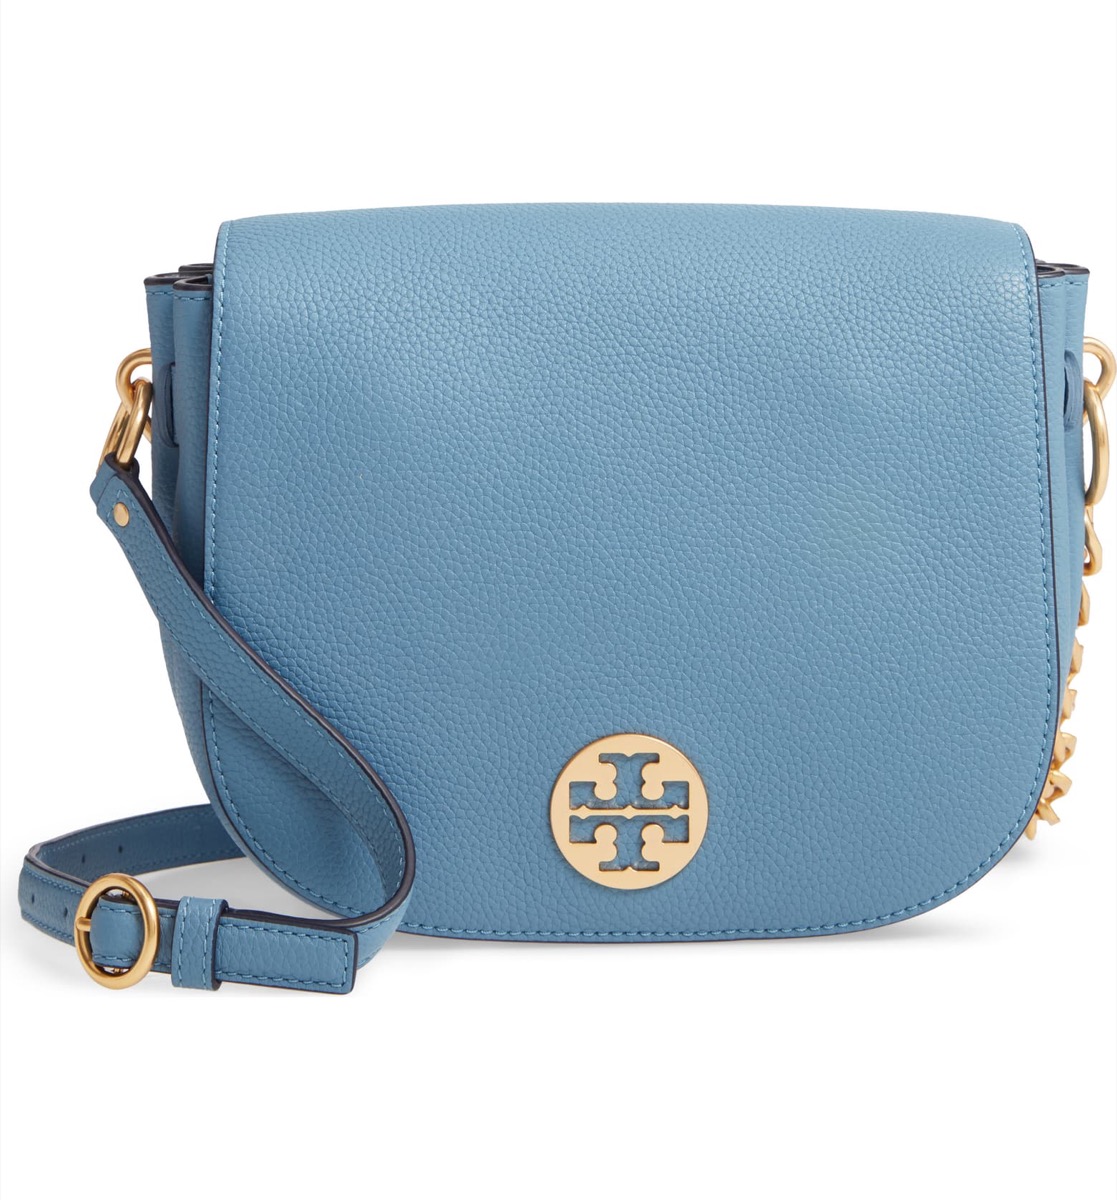 blue purse with gold logo, end of summer sales 2019